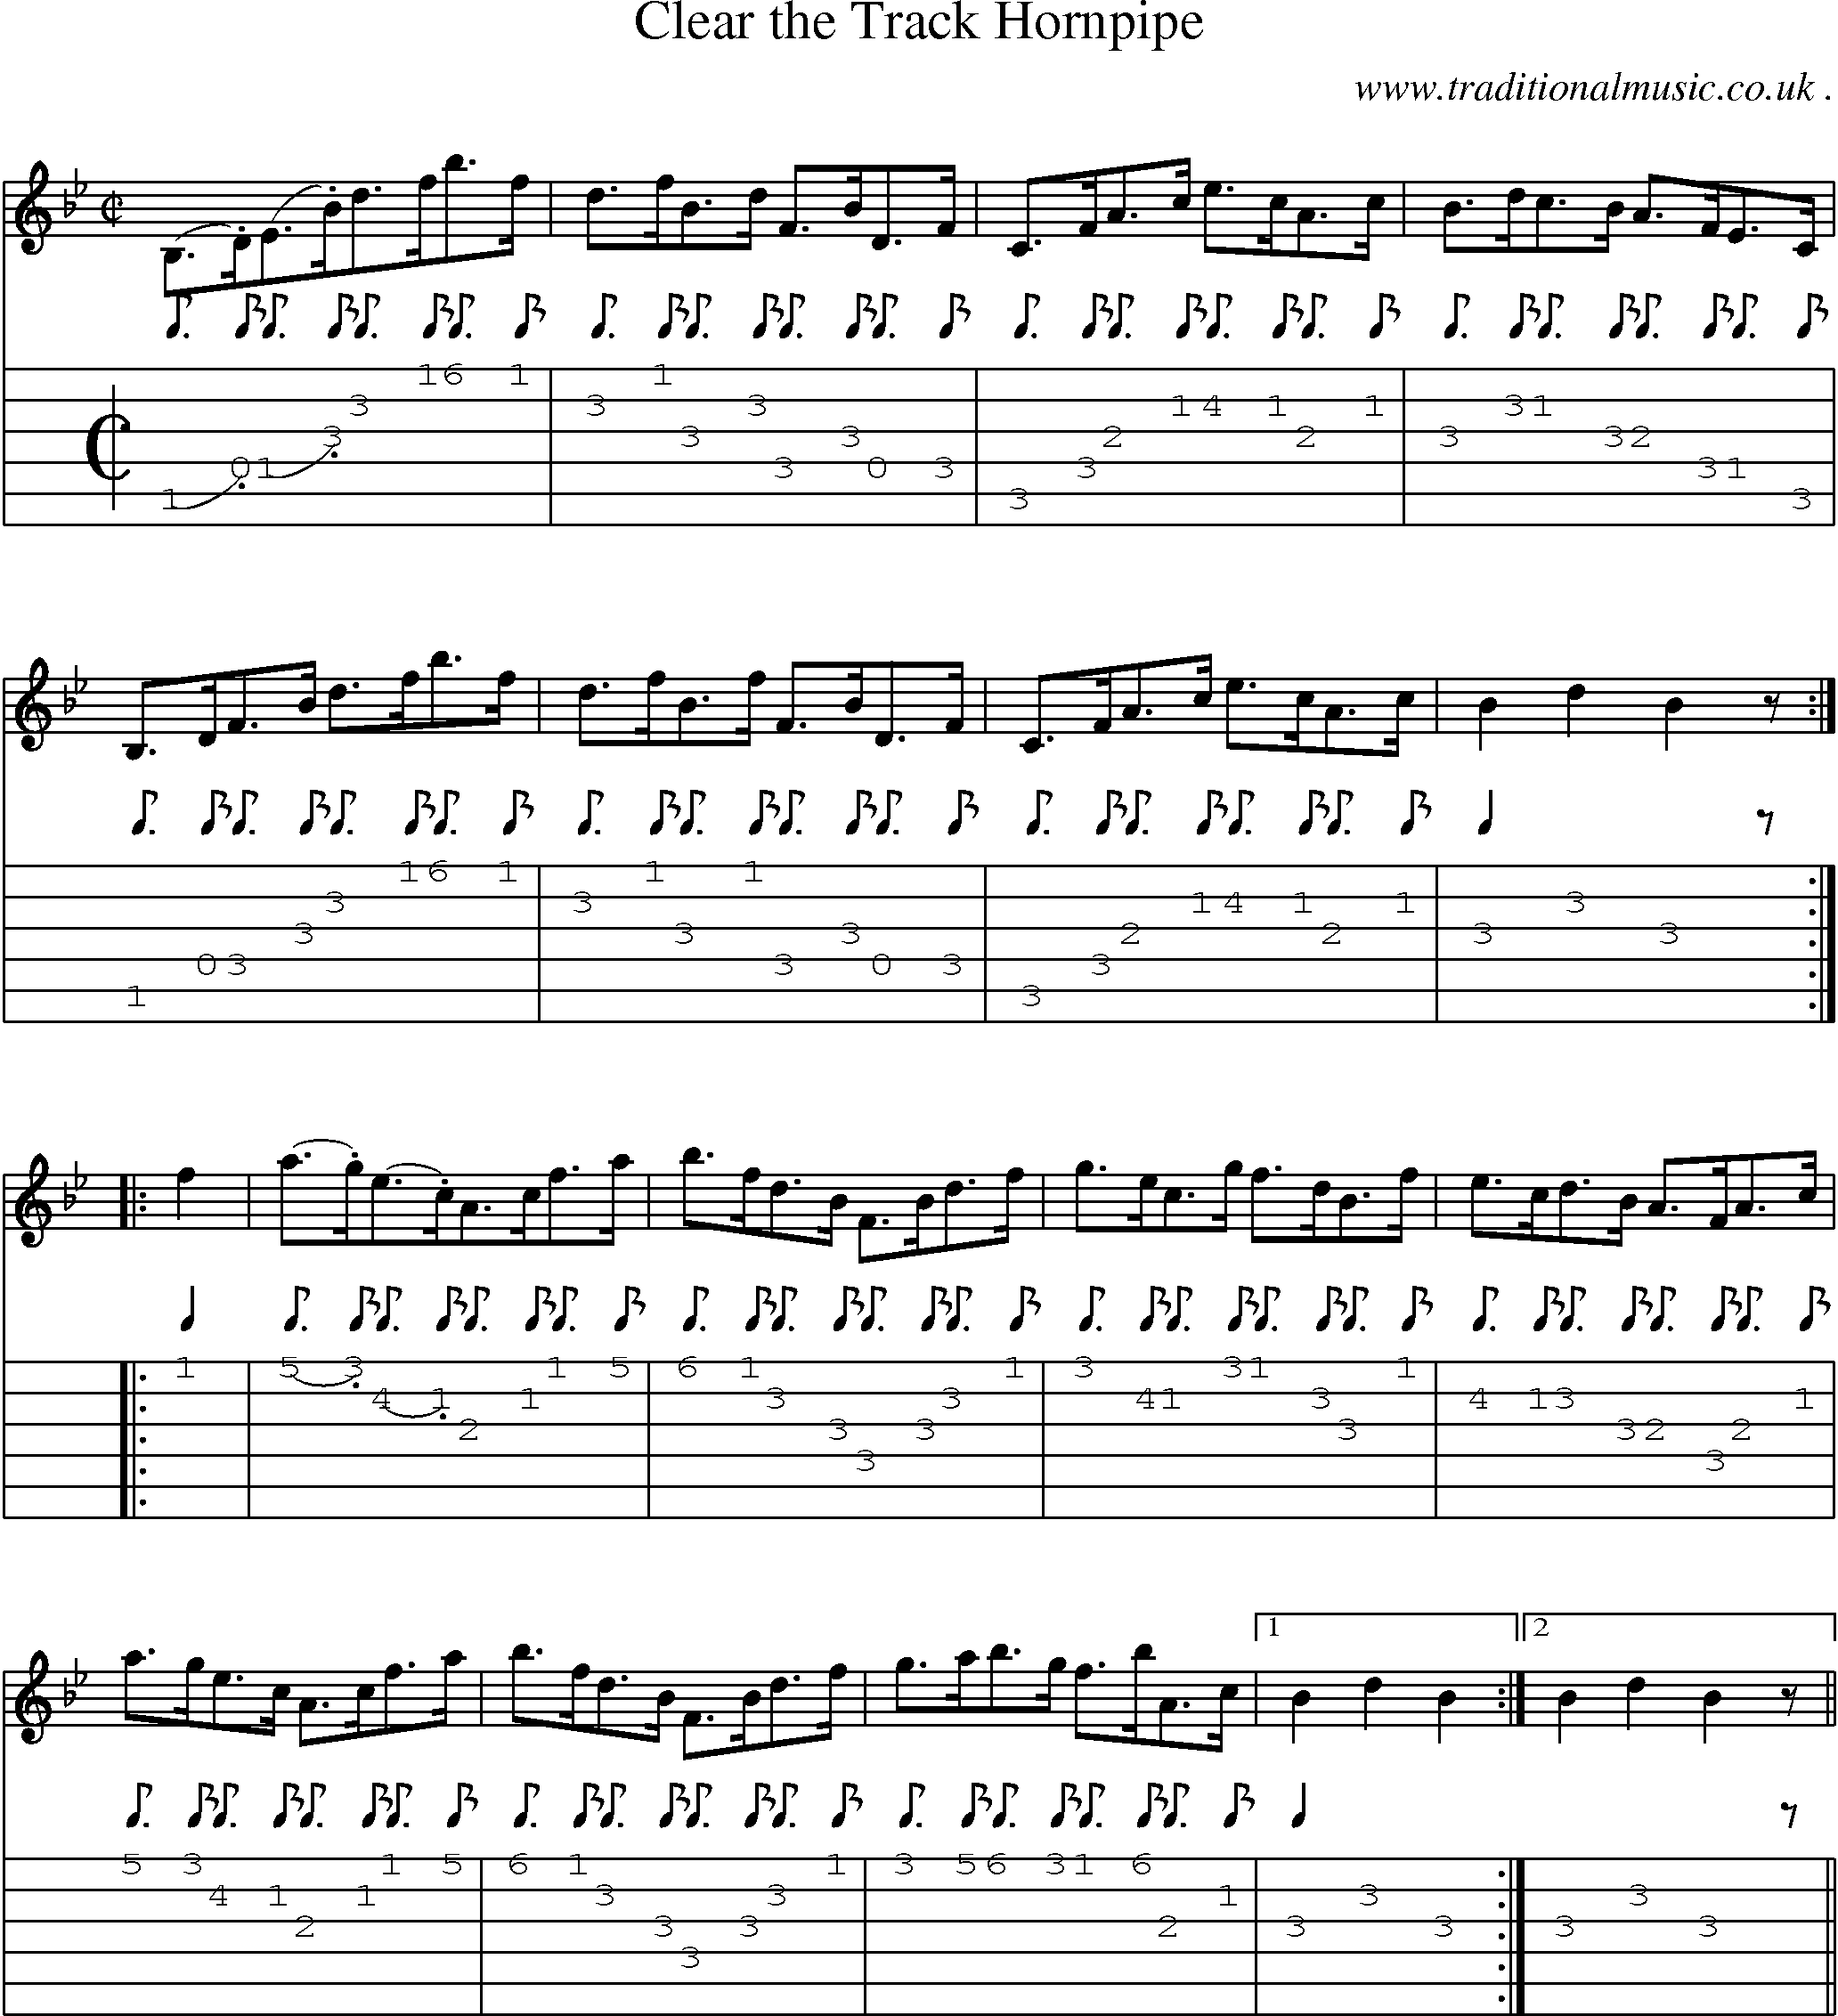 Sheet-Music and Guitar Tabs for Clear The Track Hornpipe